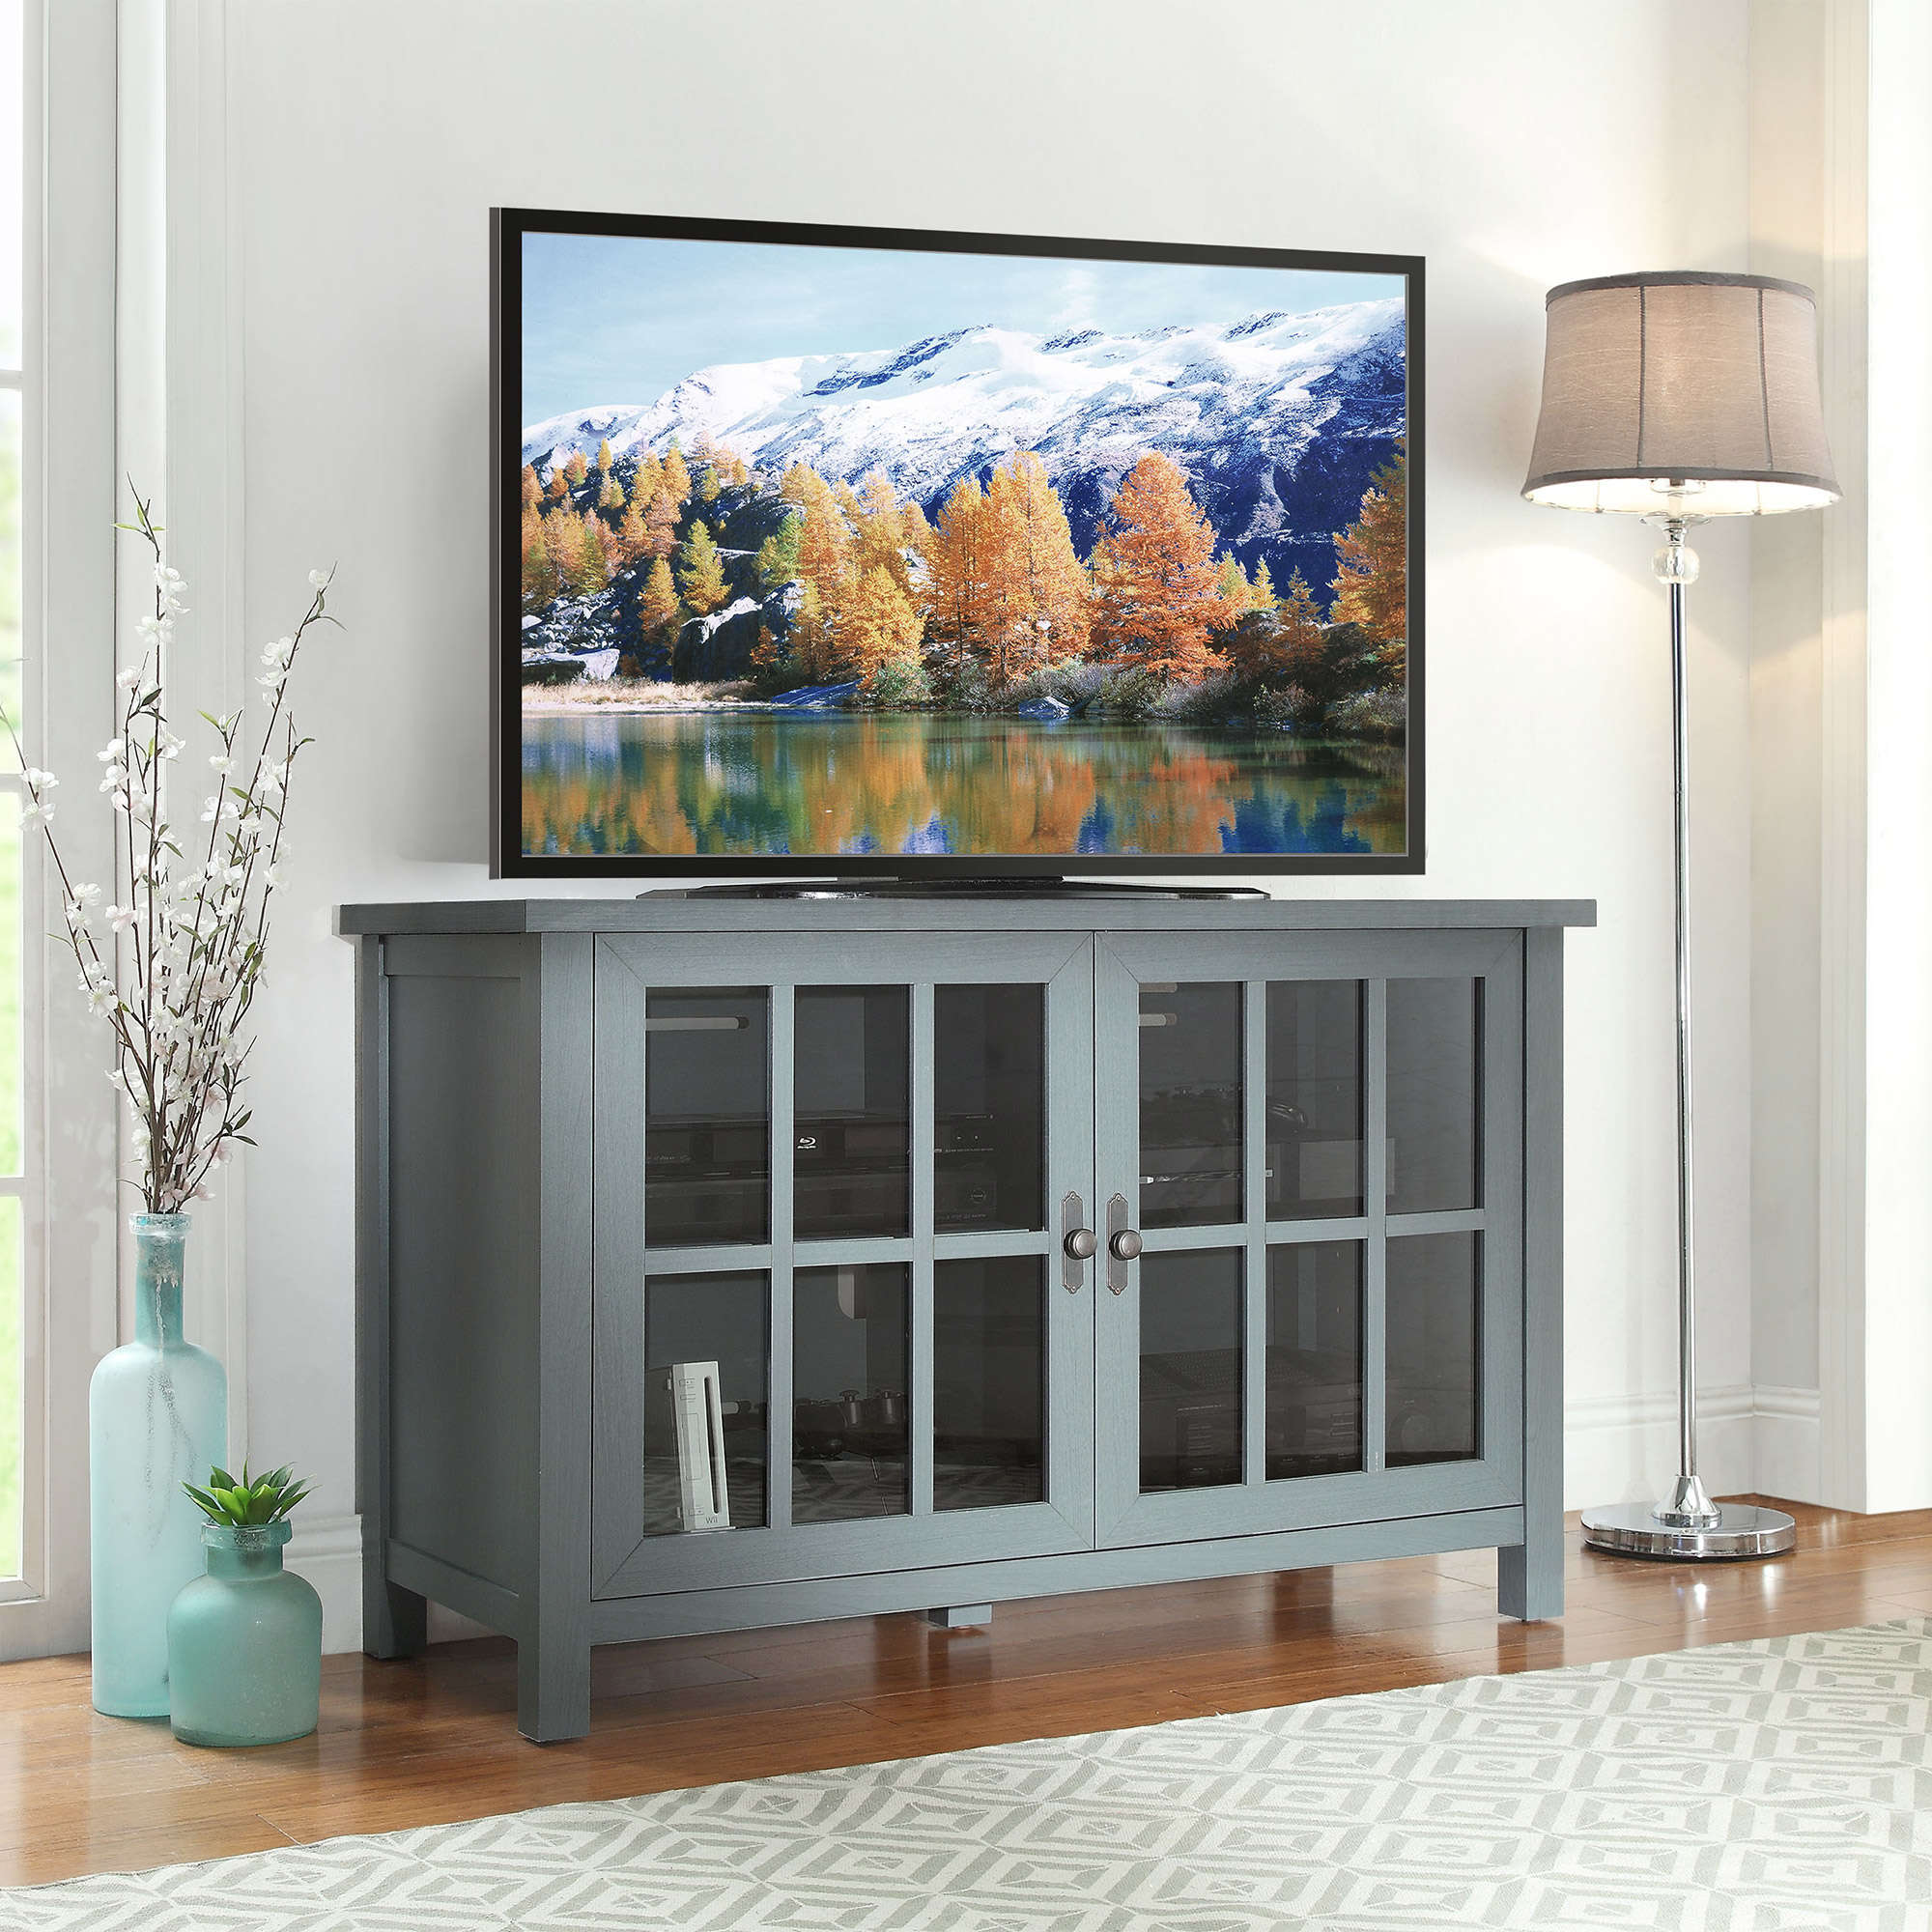 Better Homes & Gardens Oxford Square TV Stand for TVs up to 55", Antique Blue - image 1 of 7